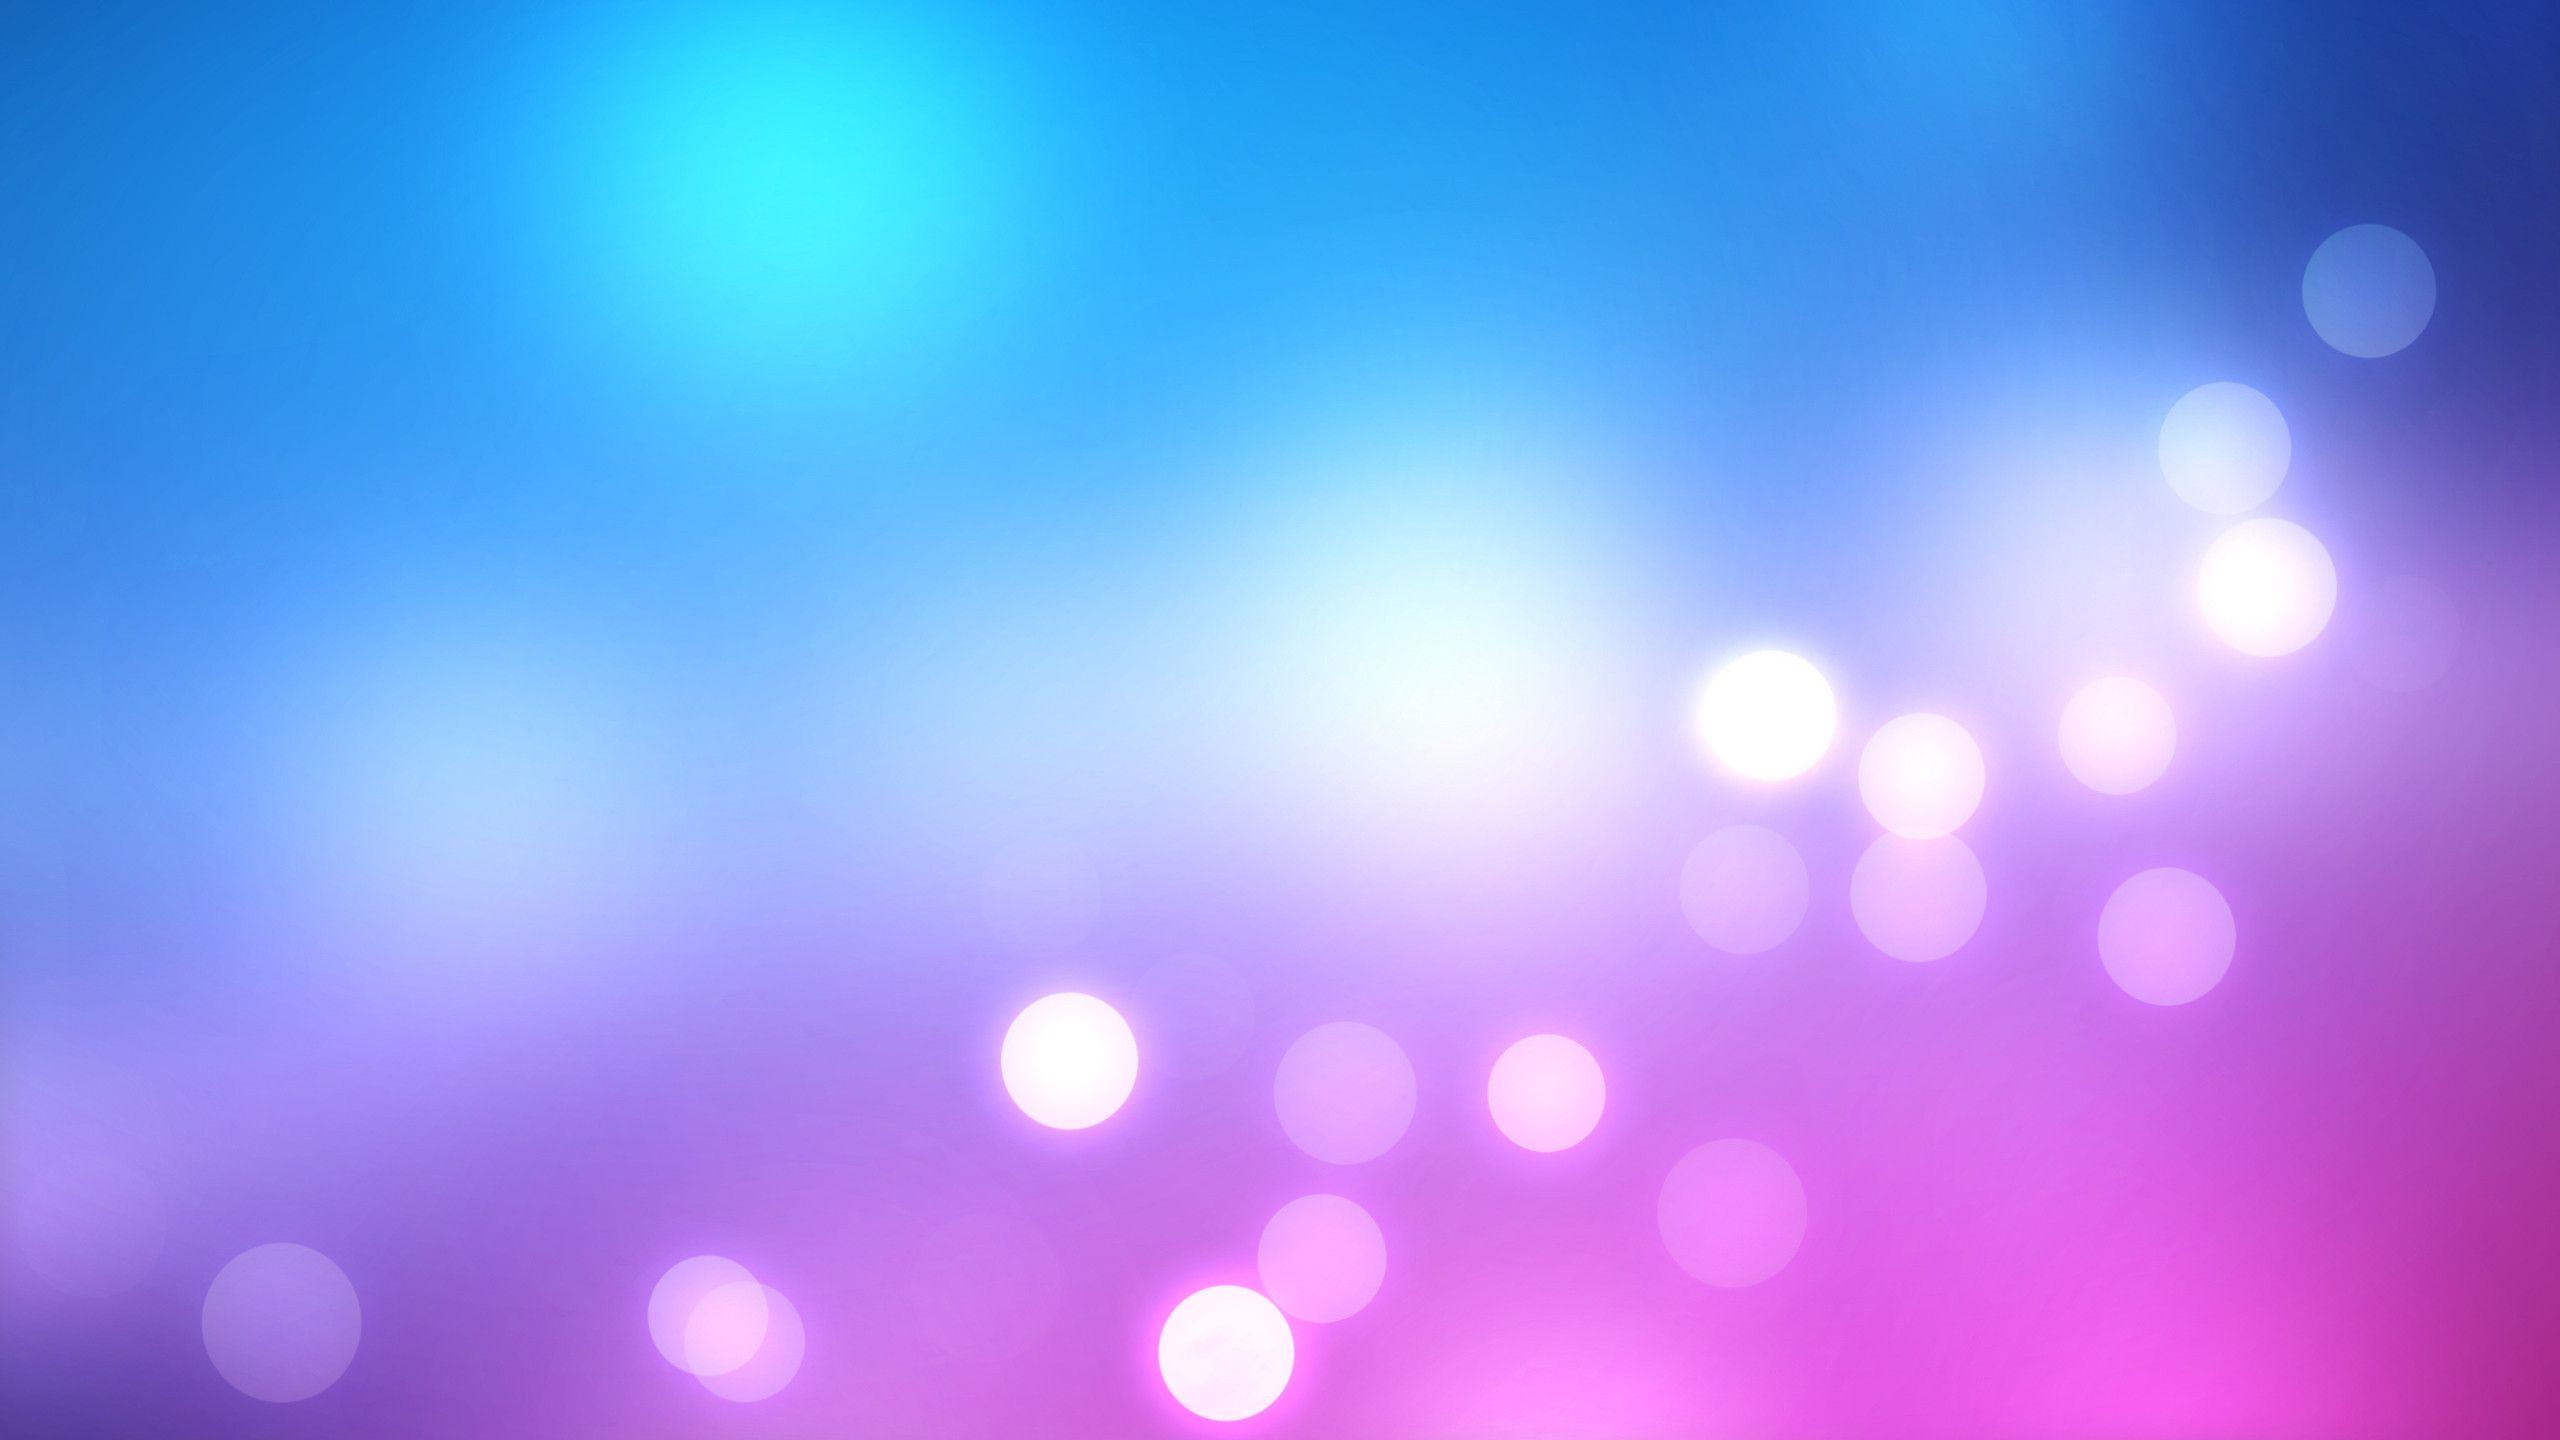 Wallpaper For > Light Blue And Purple Background